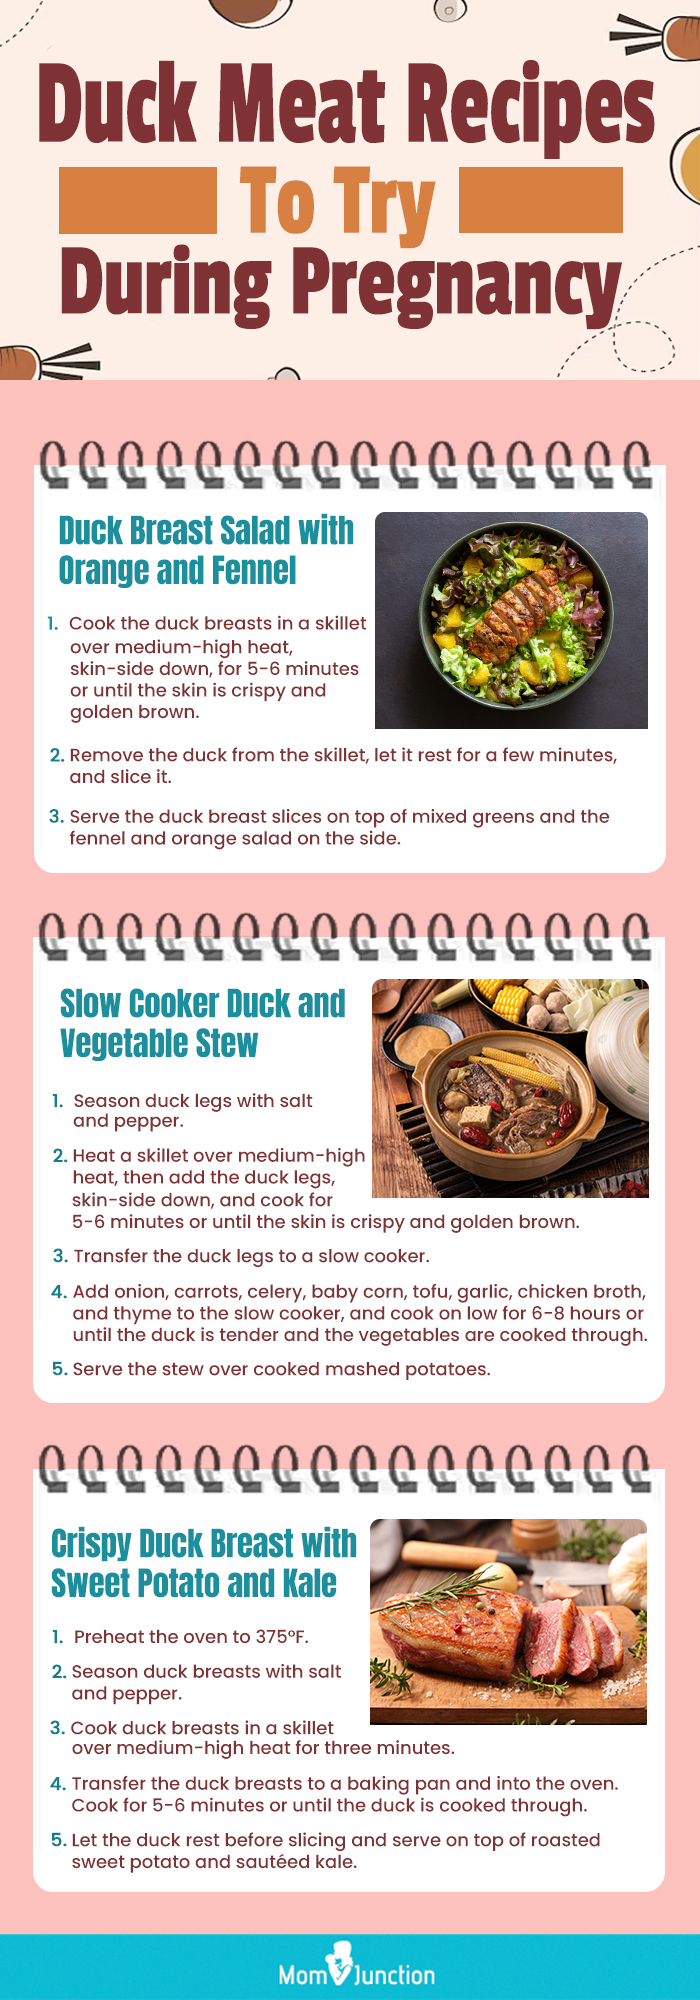 duck meat recipes to try during pregnancy (infographic)